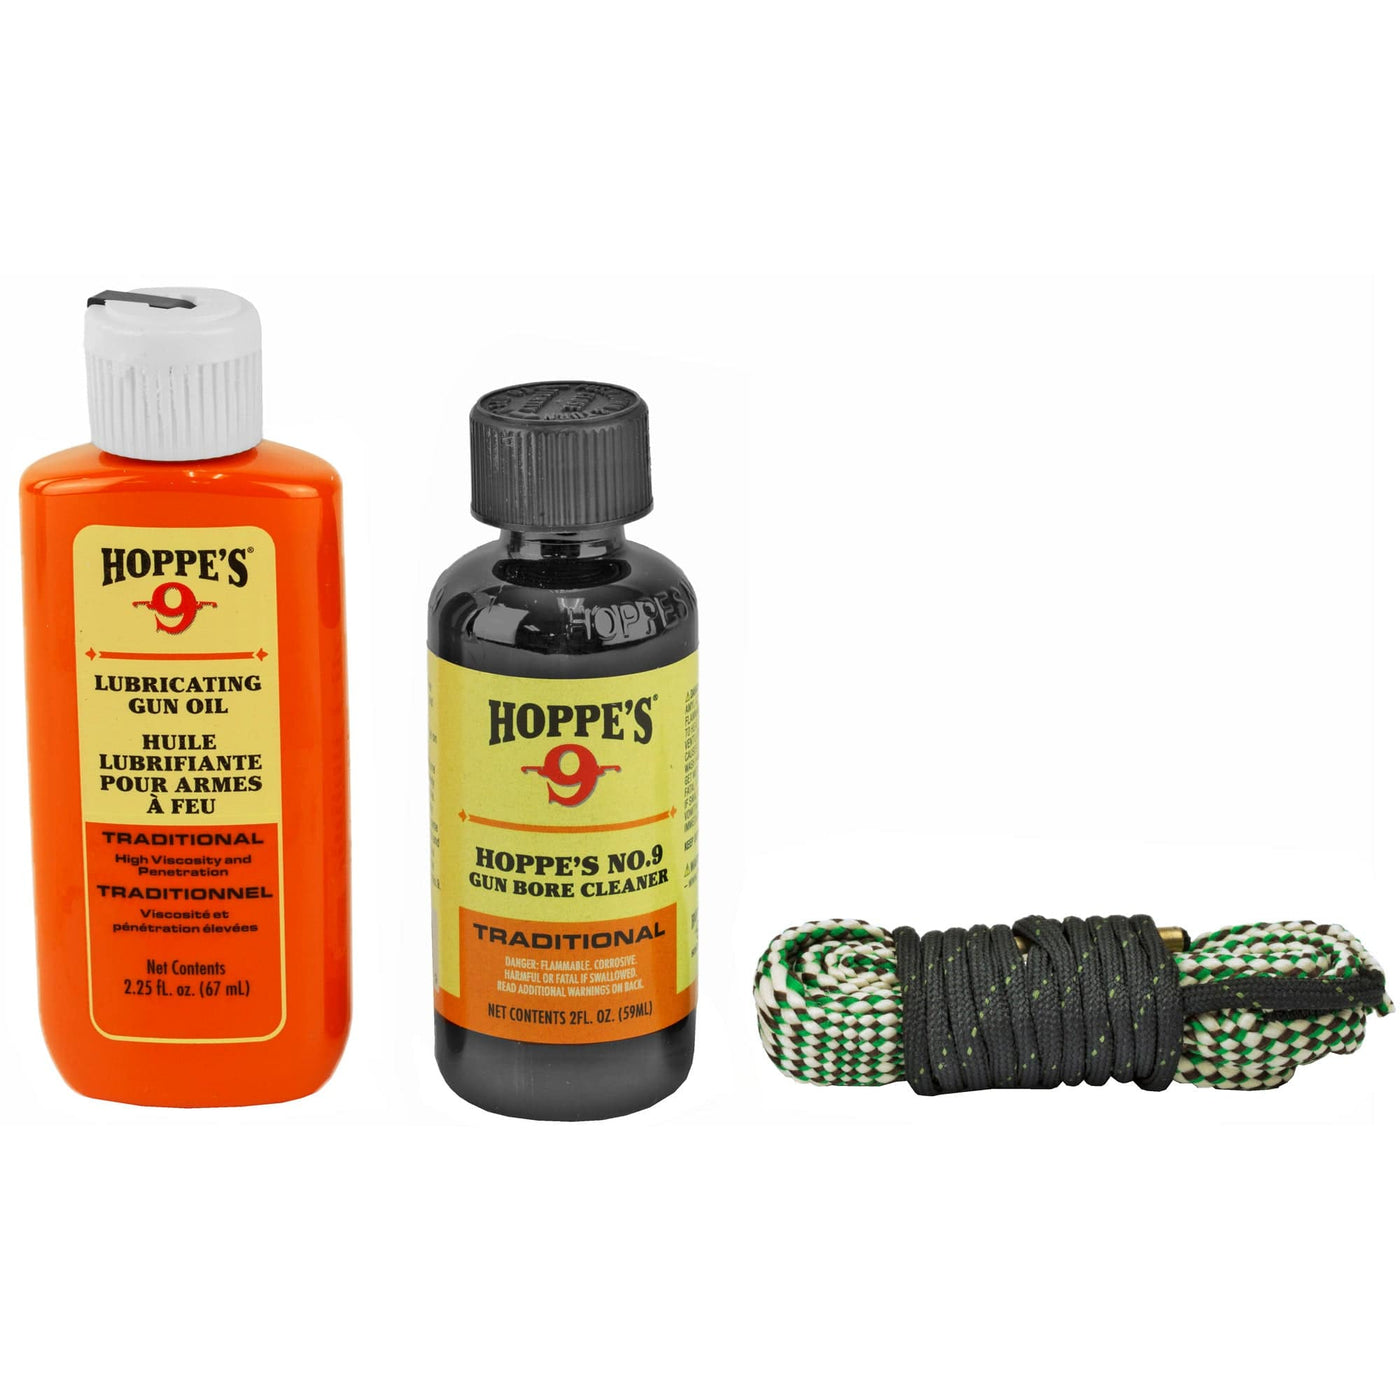 Hoppes Hoppes 1.2.3. Done .30cal - Rifle Cleaning Kit< .30cal Cleaning Kits